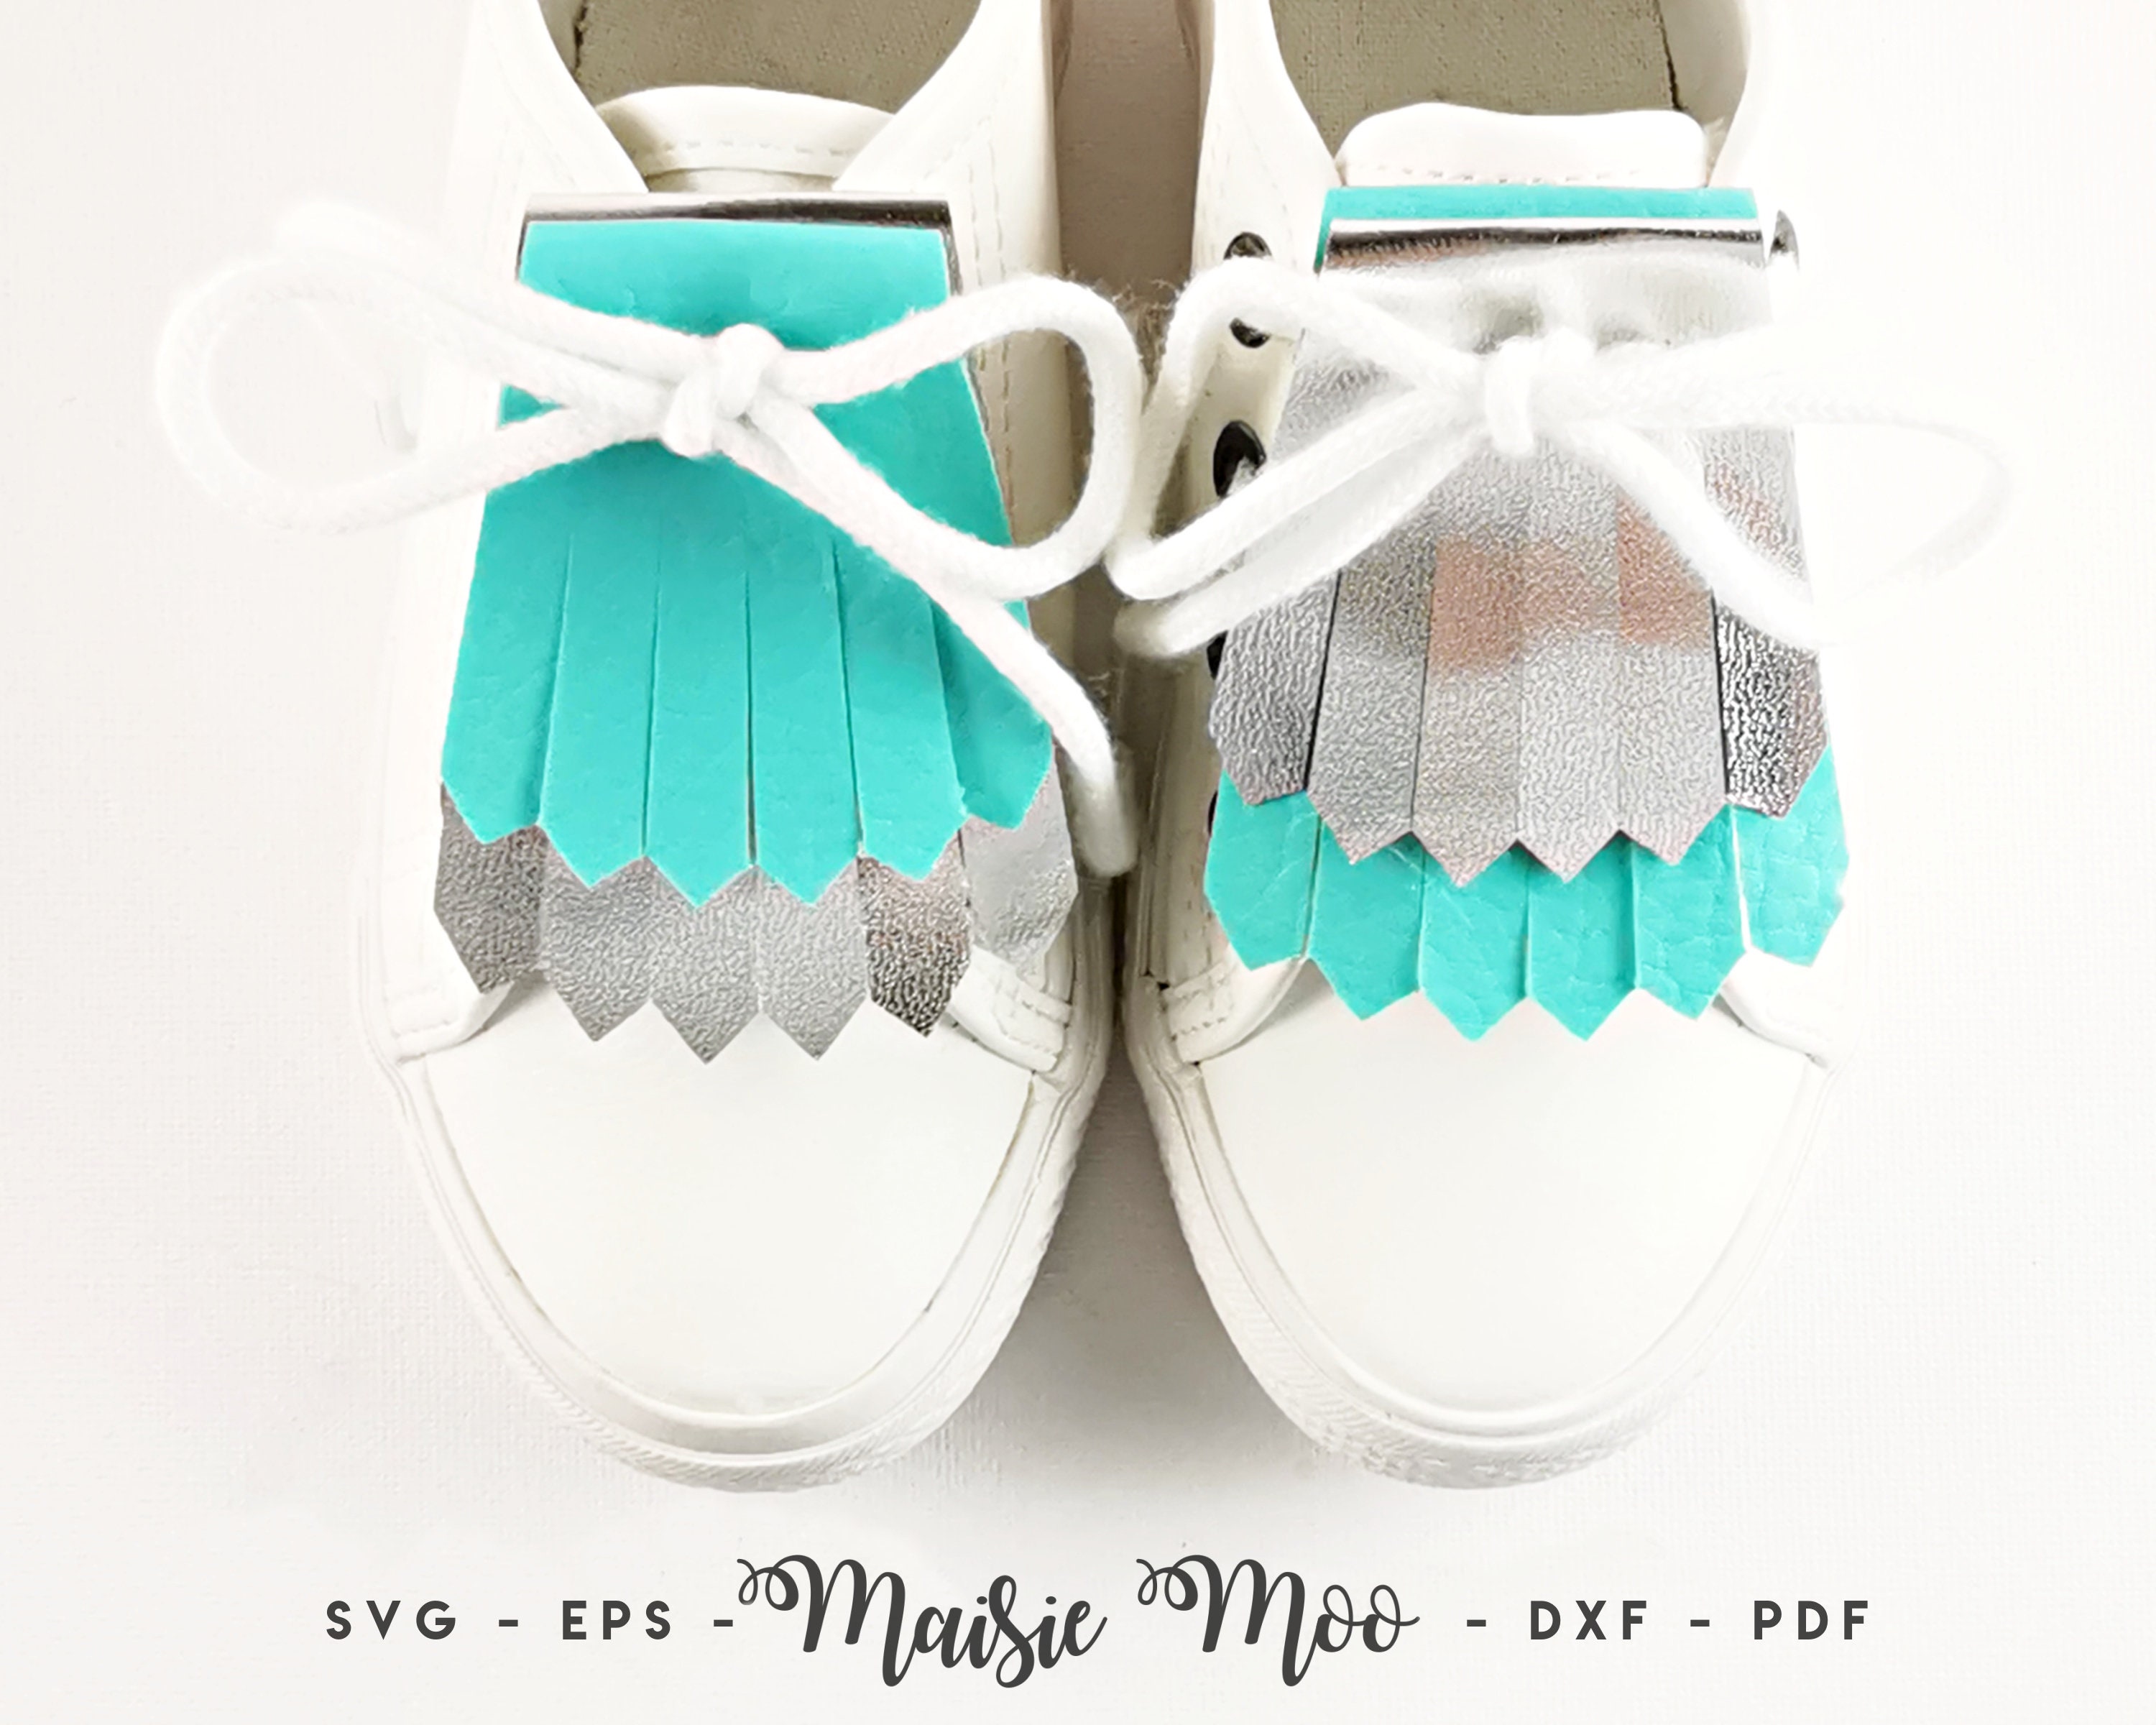 Design Your Own Canvas Shoes Trainers Craft Kits, Kids to Adult, With  Acrylic Paint Pens and Fun Laces to Match You Design. 